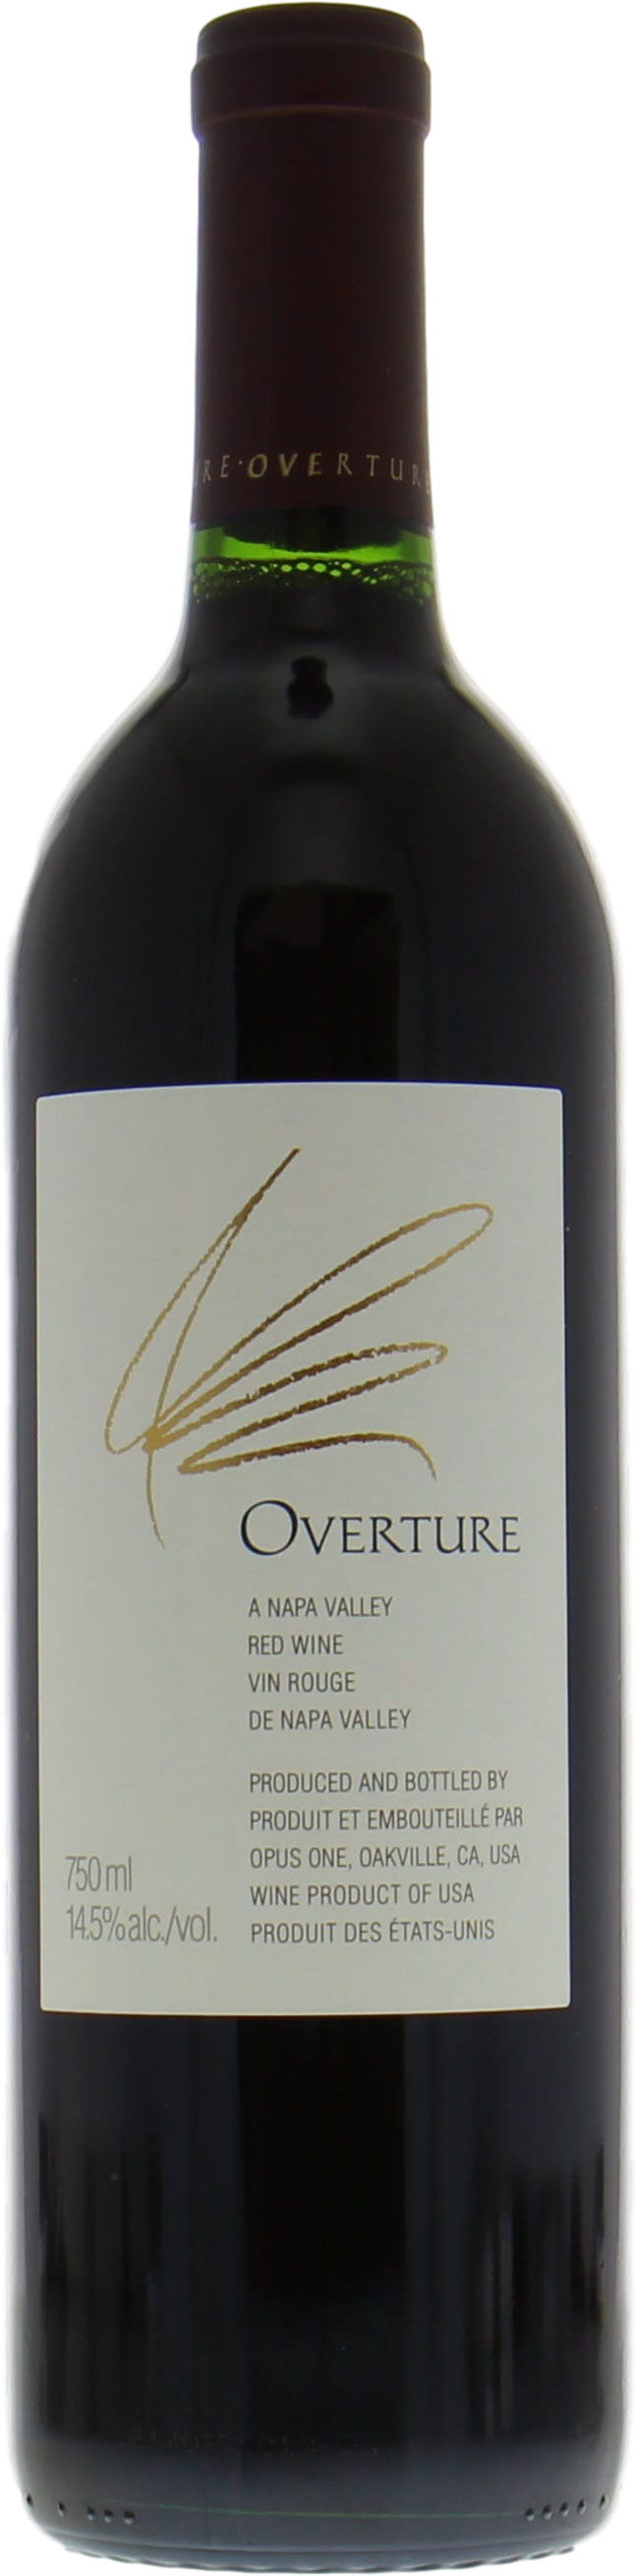 Opus One - Overture release 2016 2016 Perfect